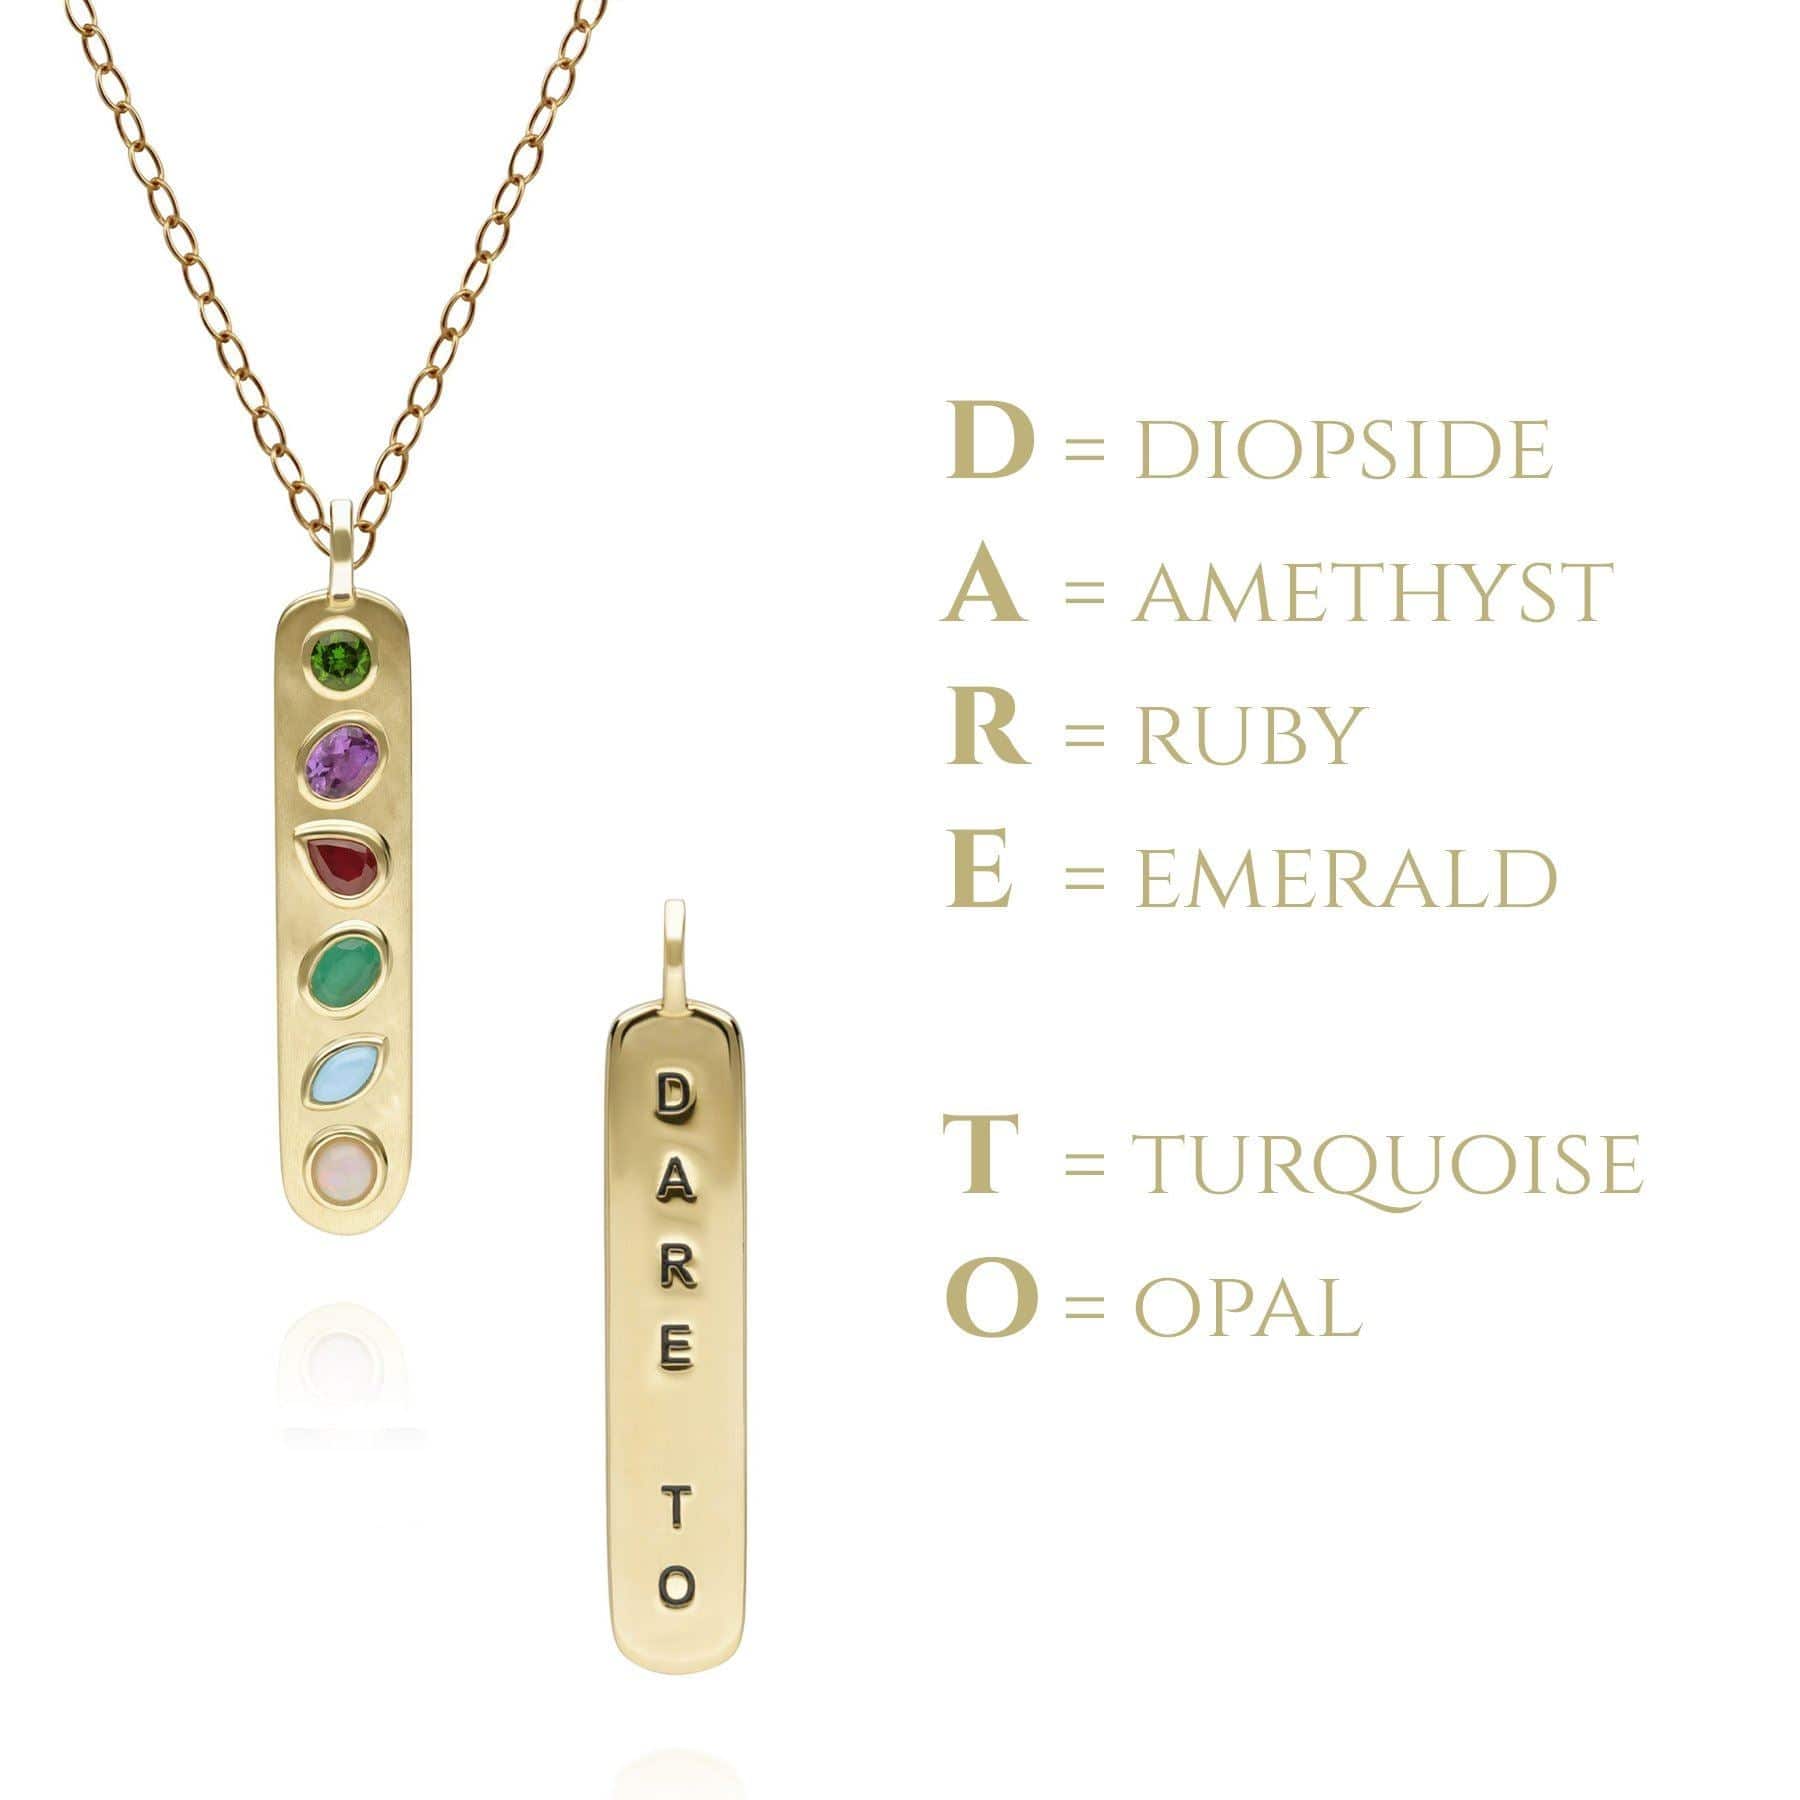 253P312301925 Coded Whispers 'Dare To' Acrostic Gemstone Pendant Necklace in Sterling Silver 5